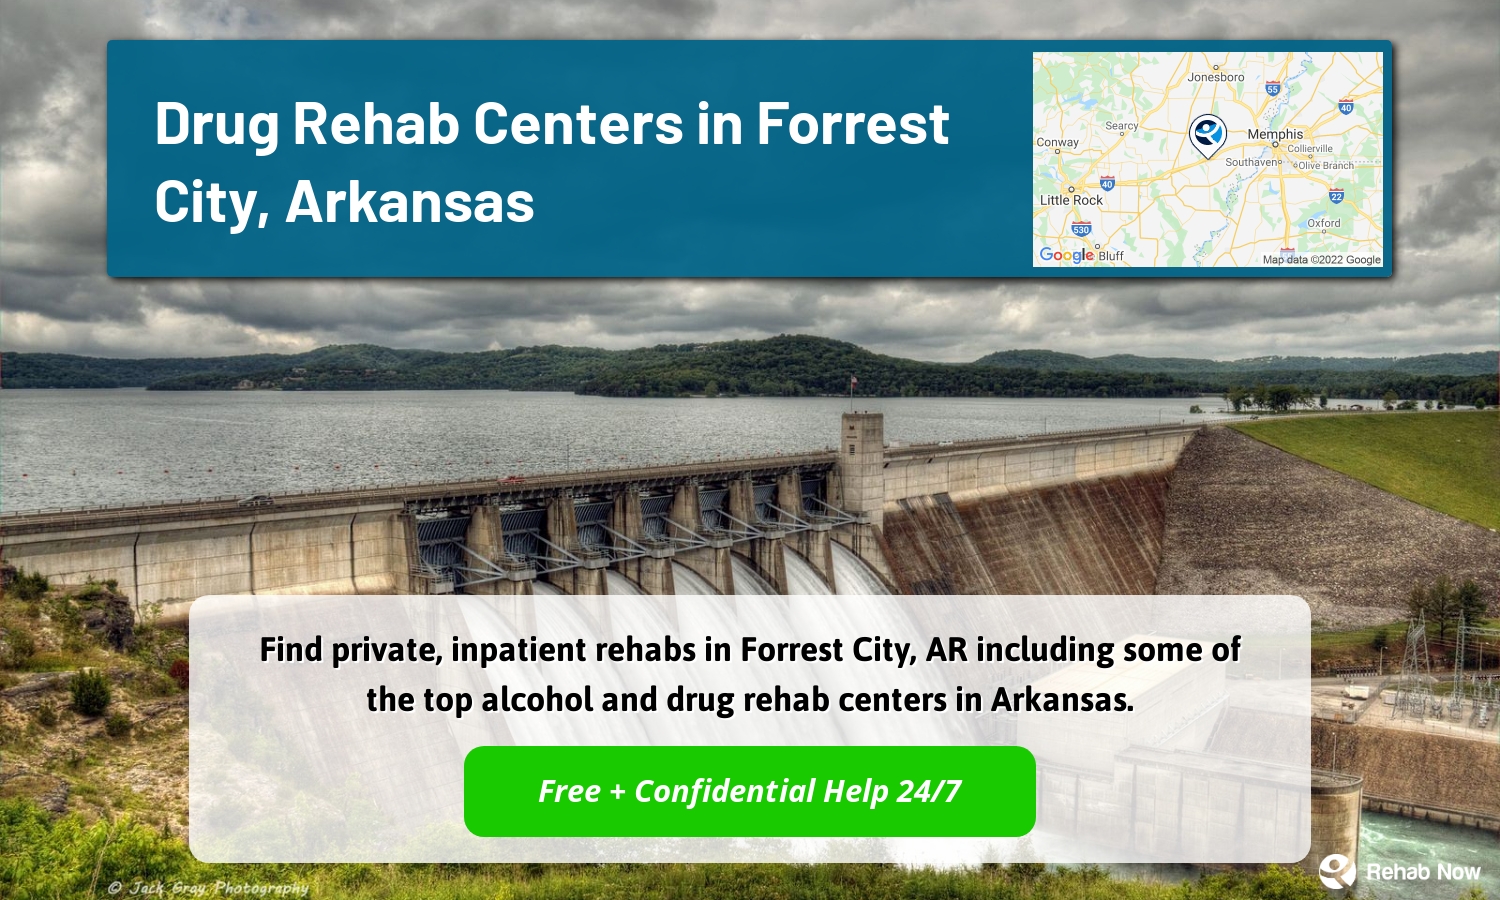 Find private, inpatient rehabs in Forrest City, AR including some of the top alcohol and drug rehab centers in Arkansas.